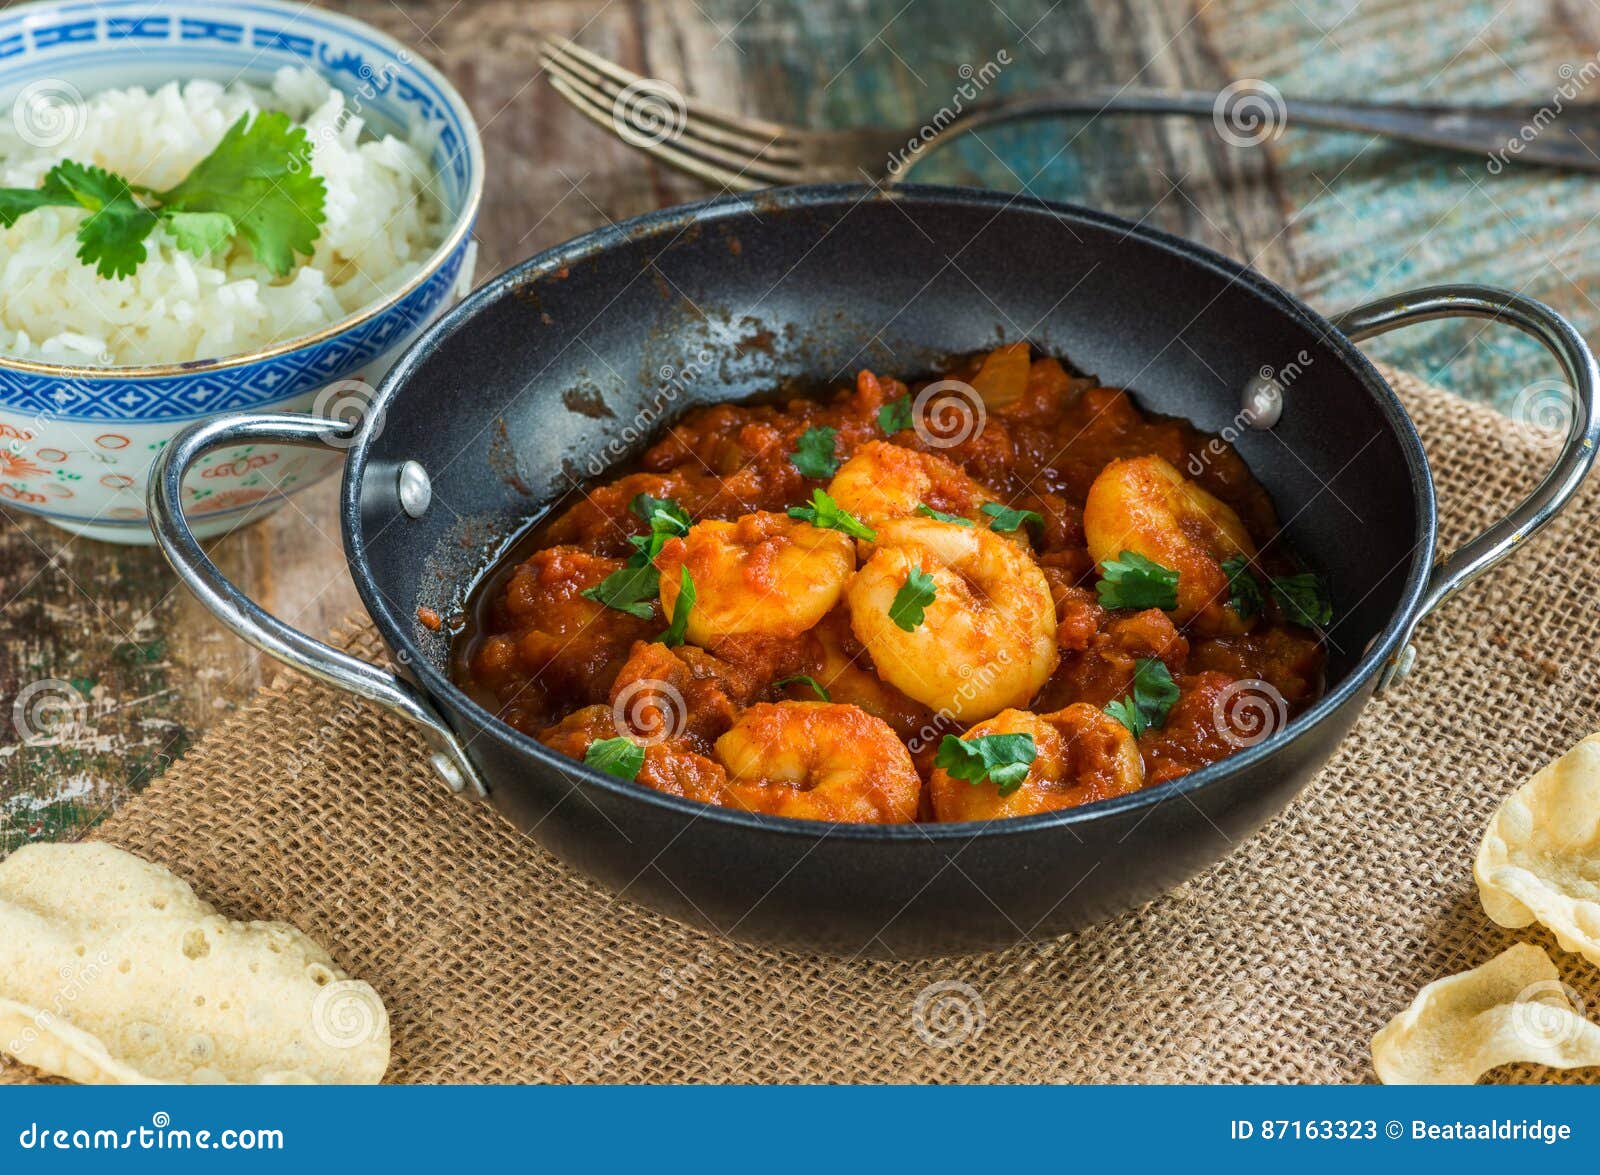 prawn curry and rice